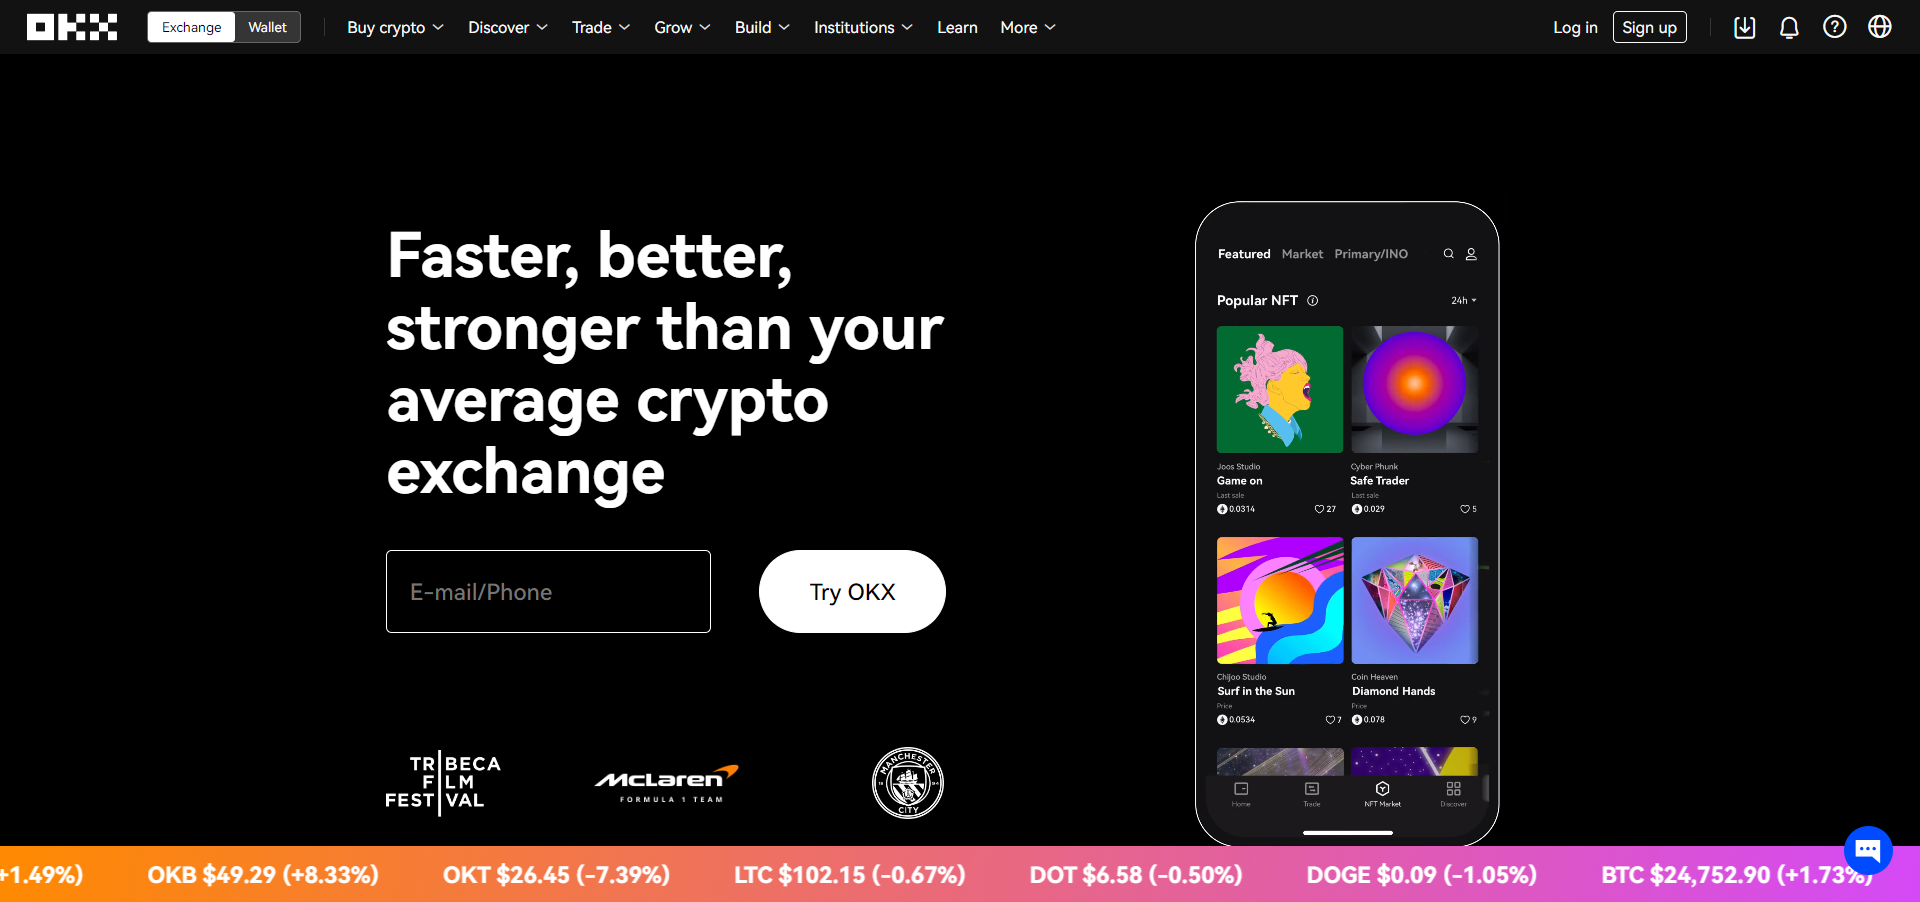 OKX is a top-tier cryptocurrency exchange